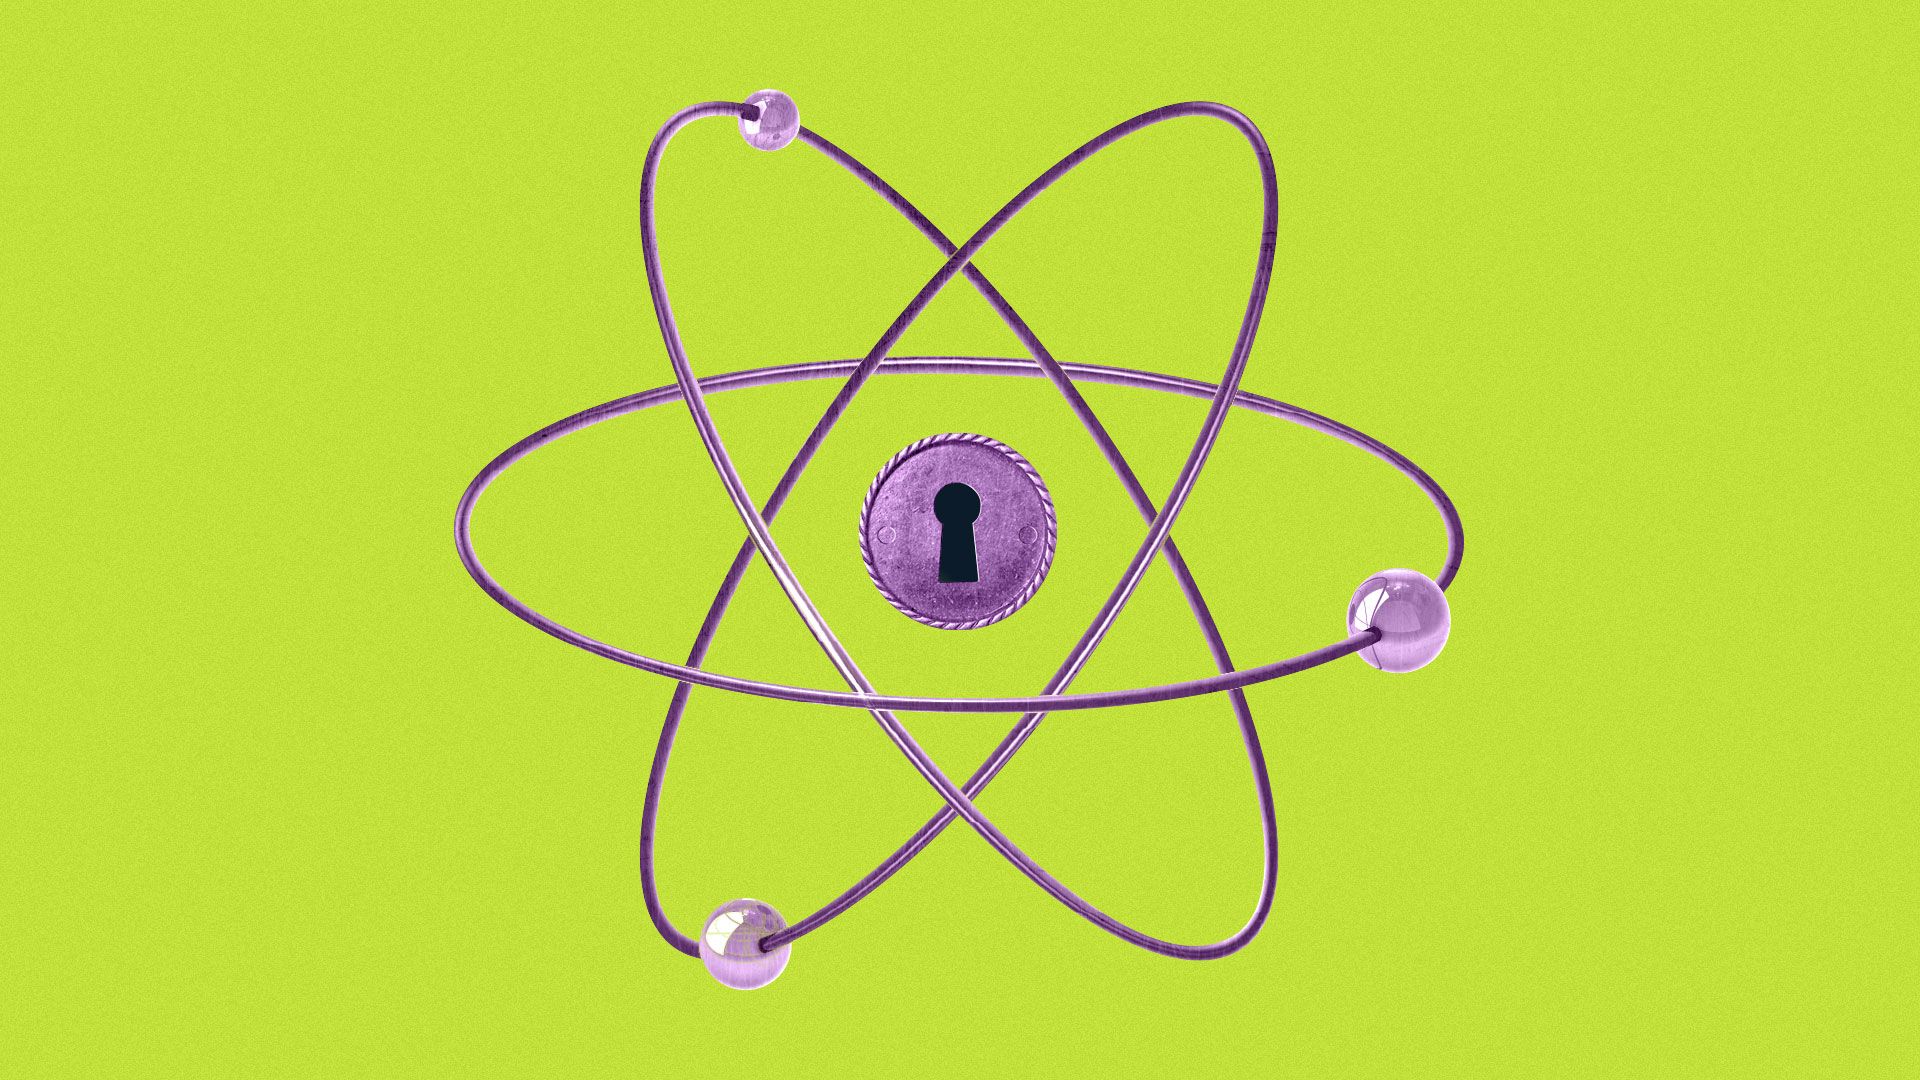 Illustration of atom with a lock in the middle.